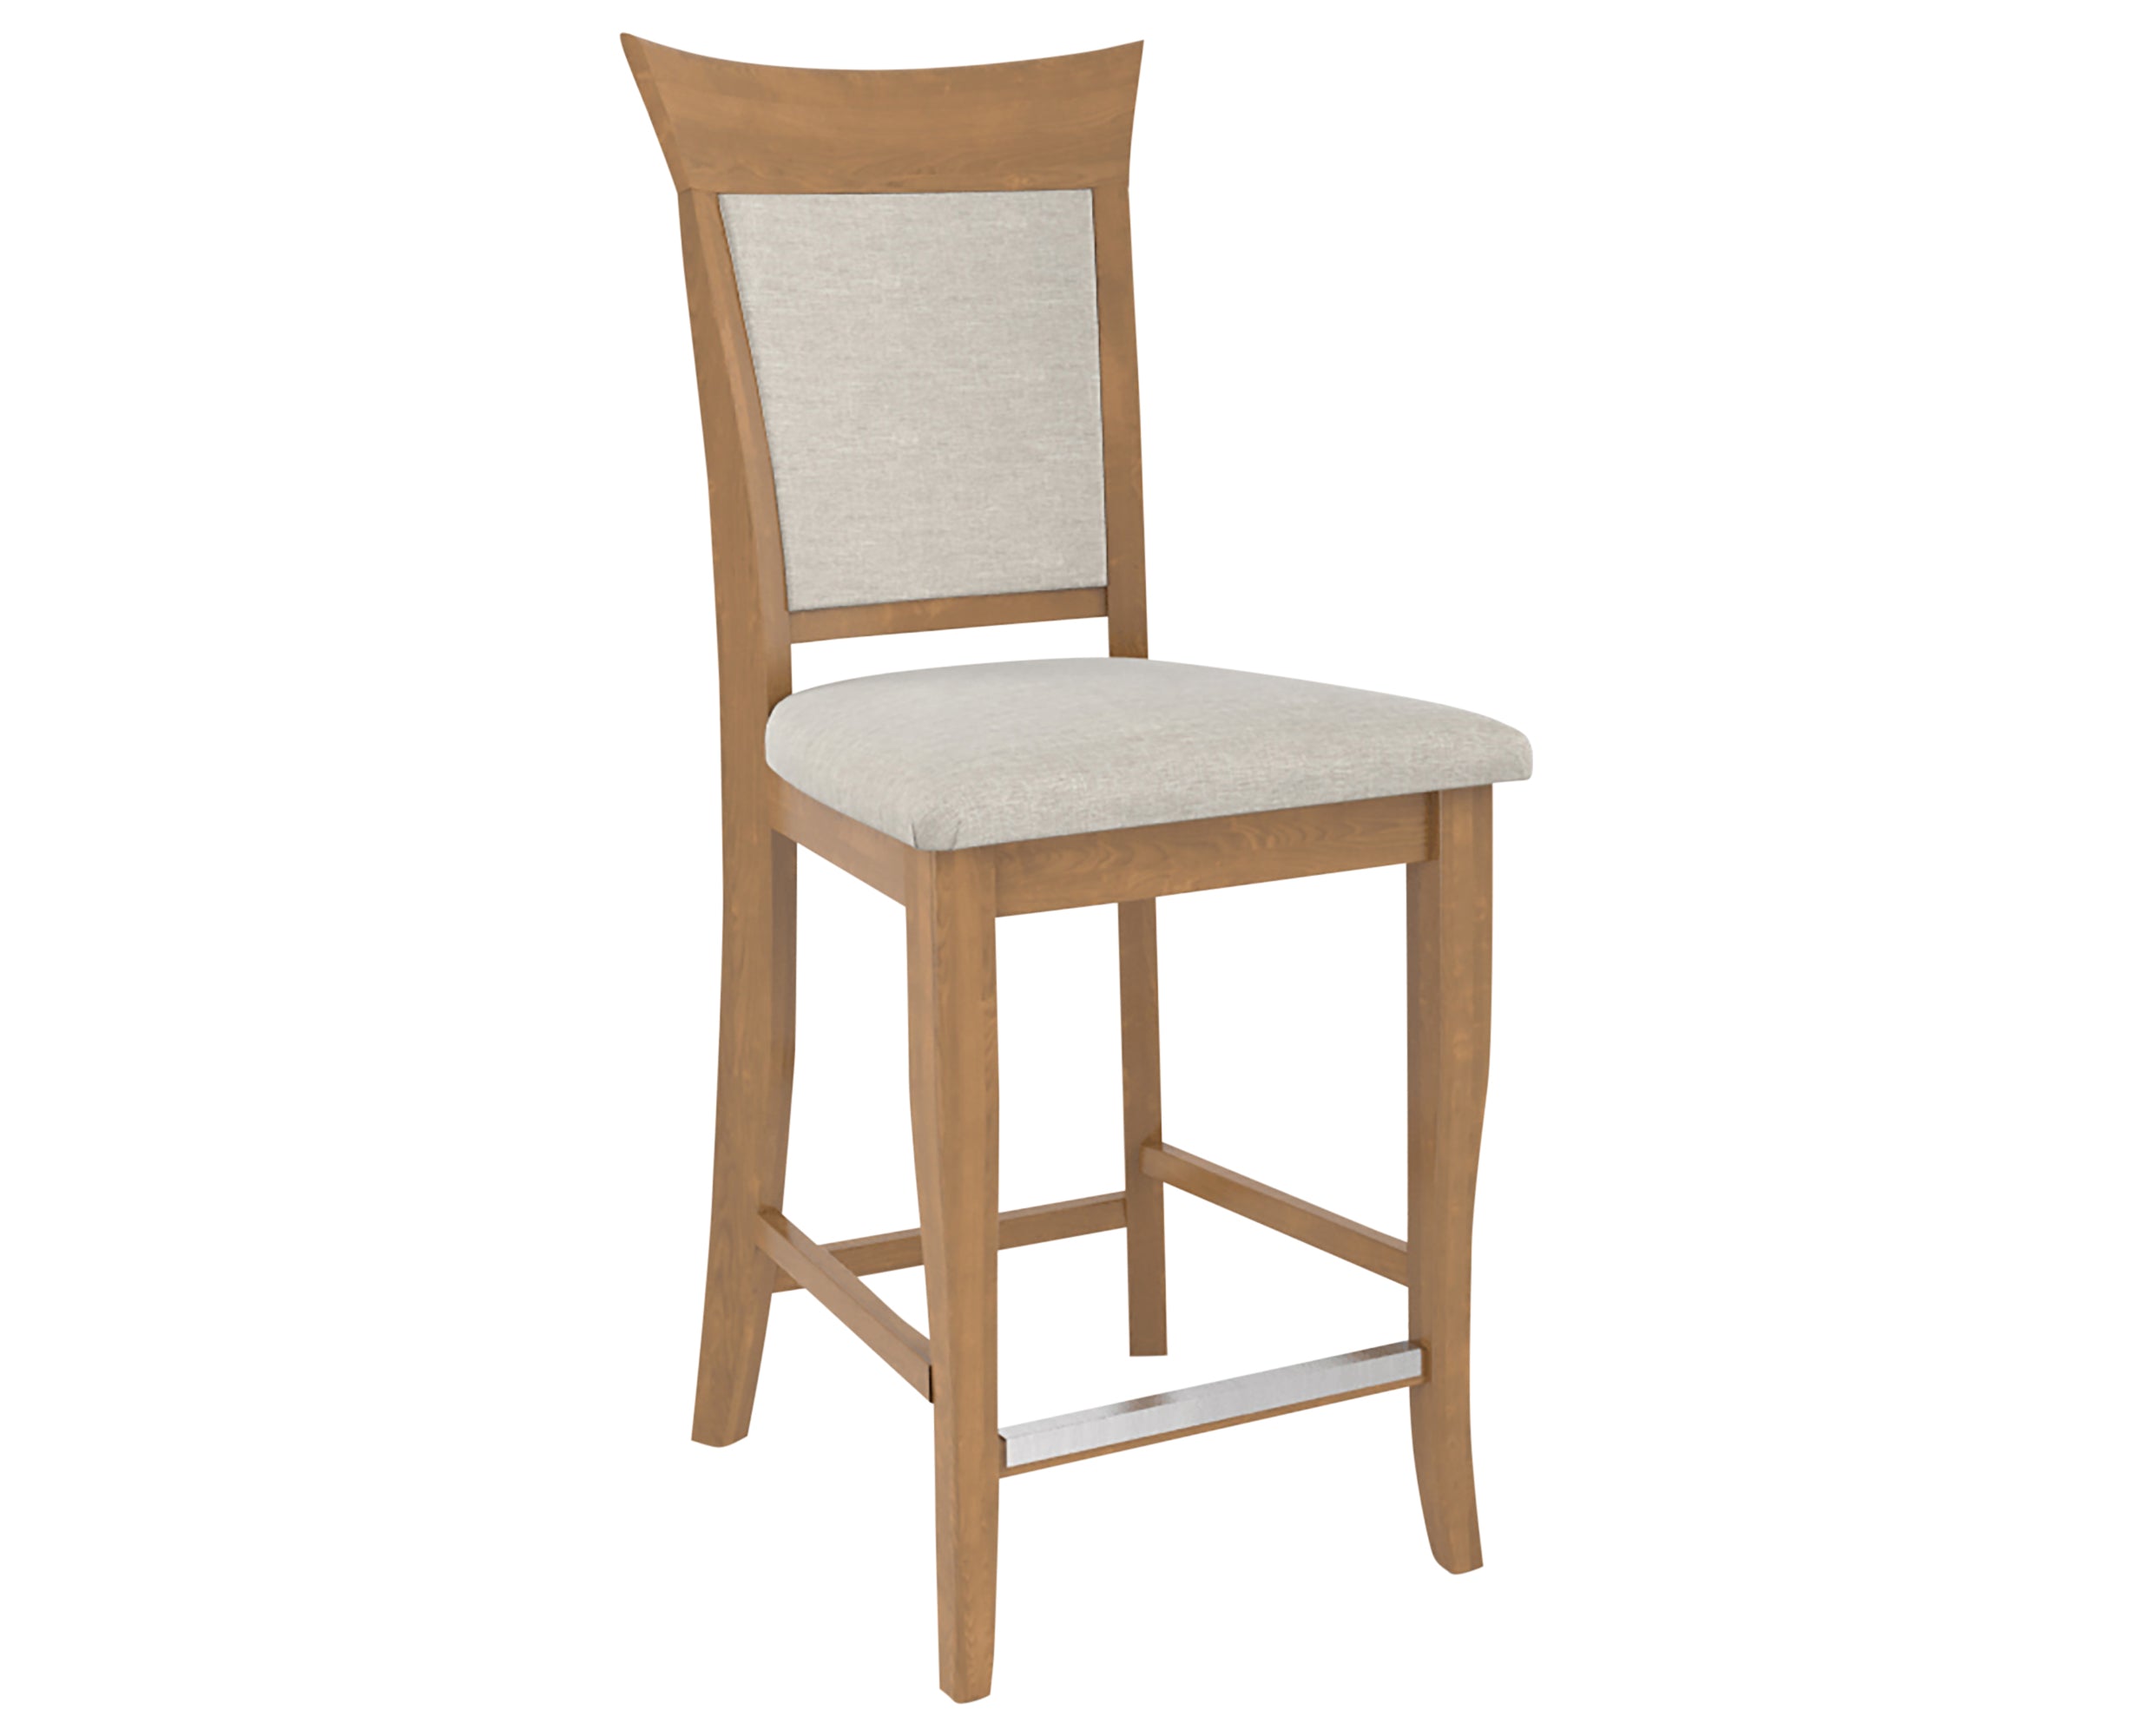 Fixed Base | Canadel Core Counter Stool 8274 | Valley Ridge Furniture